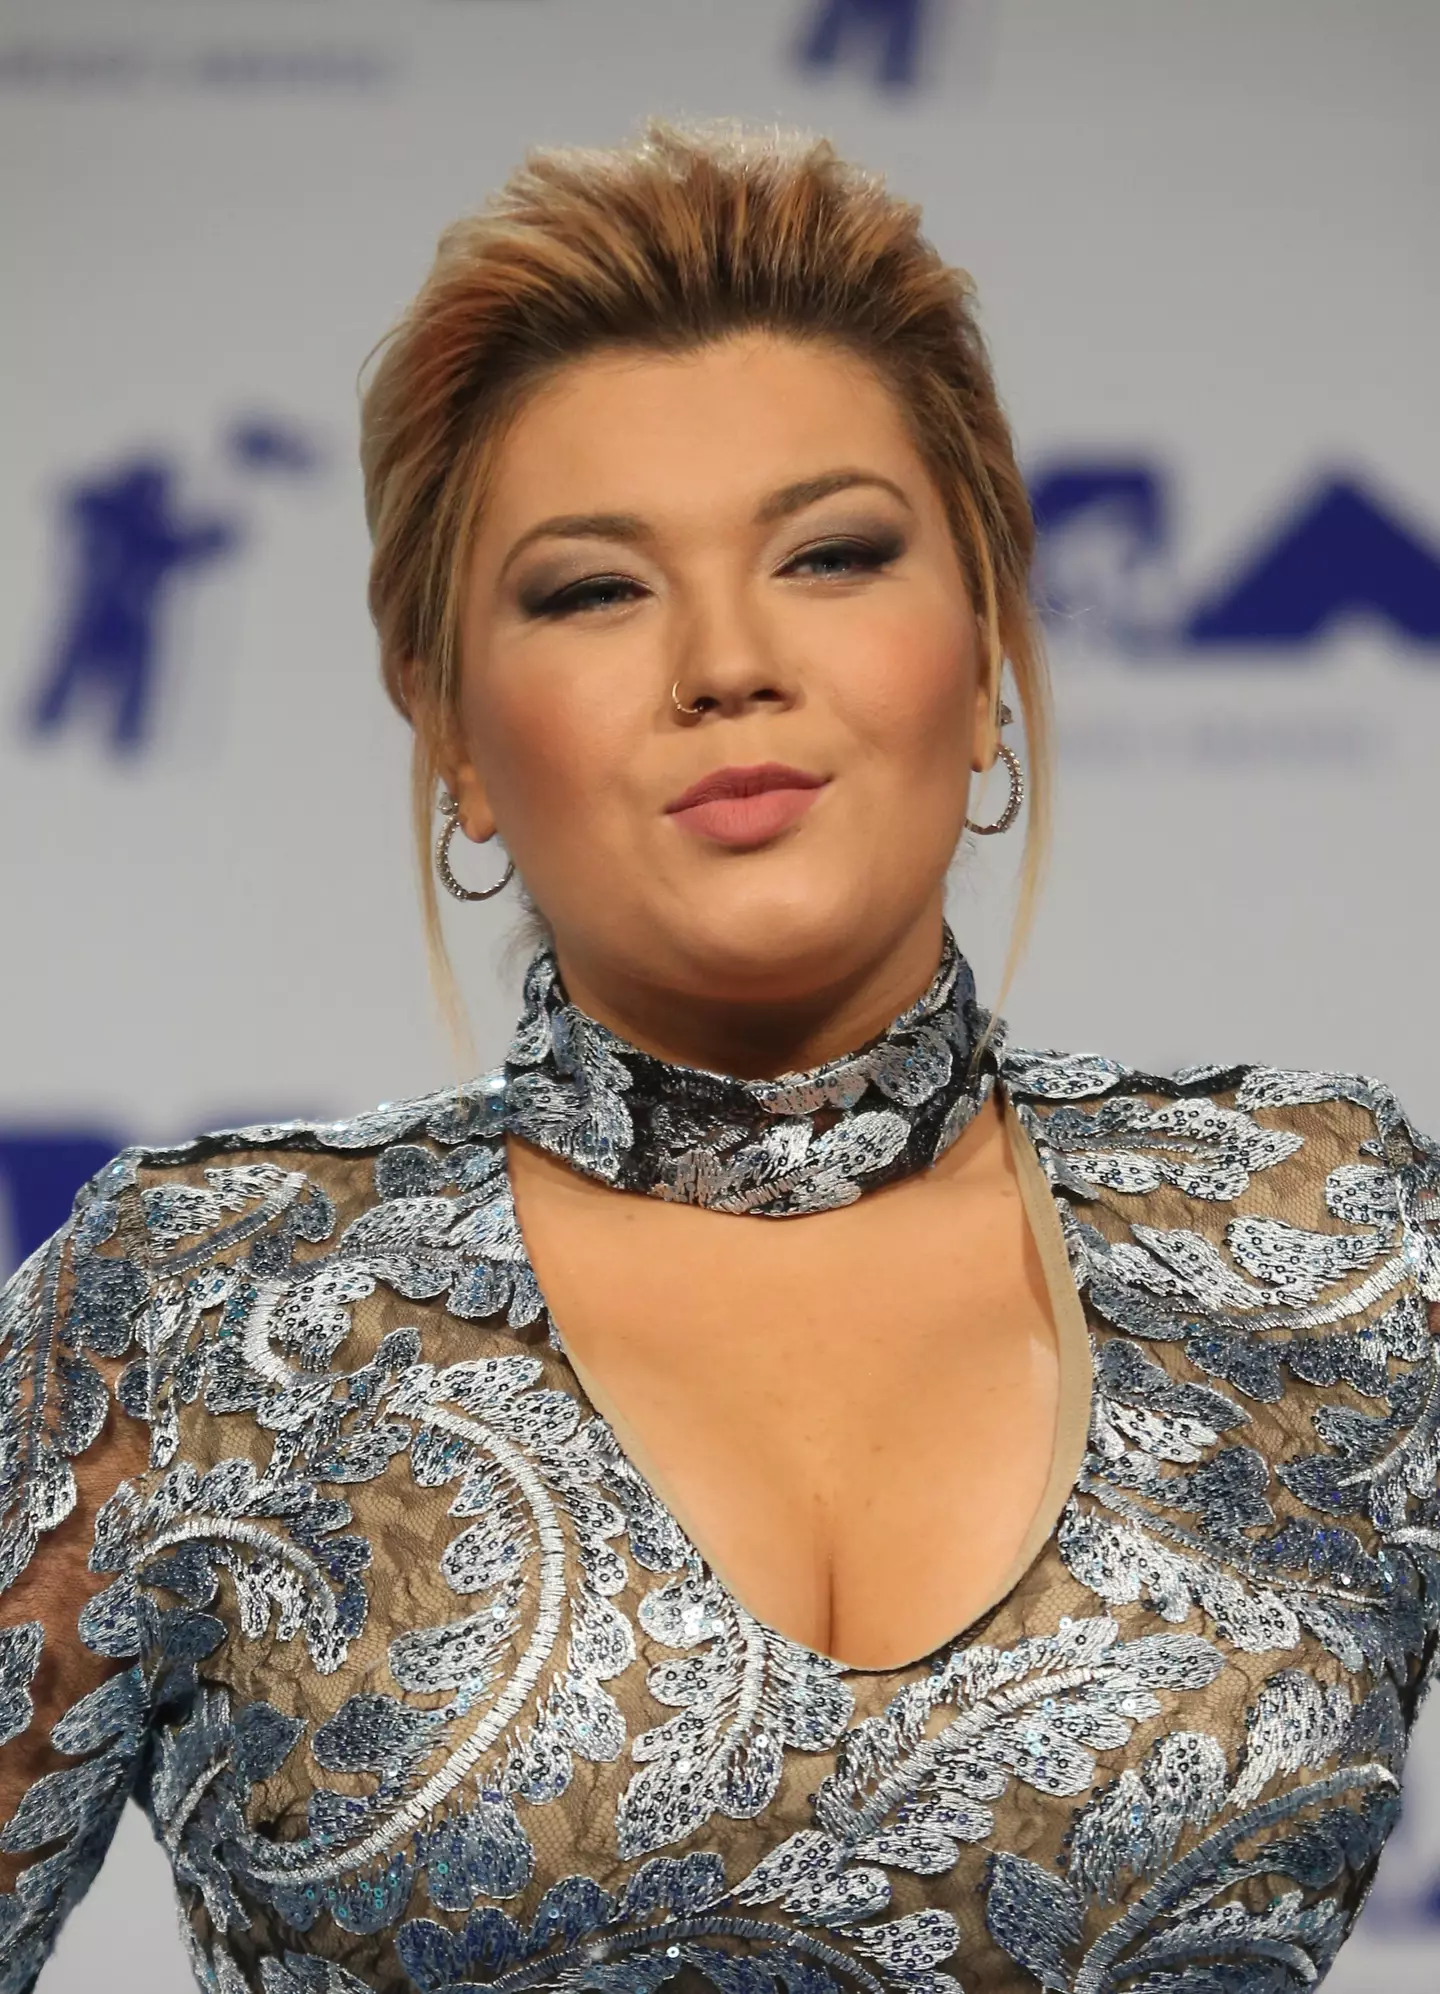 Amber Portwood in 2017.